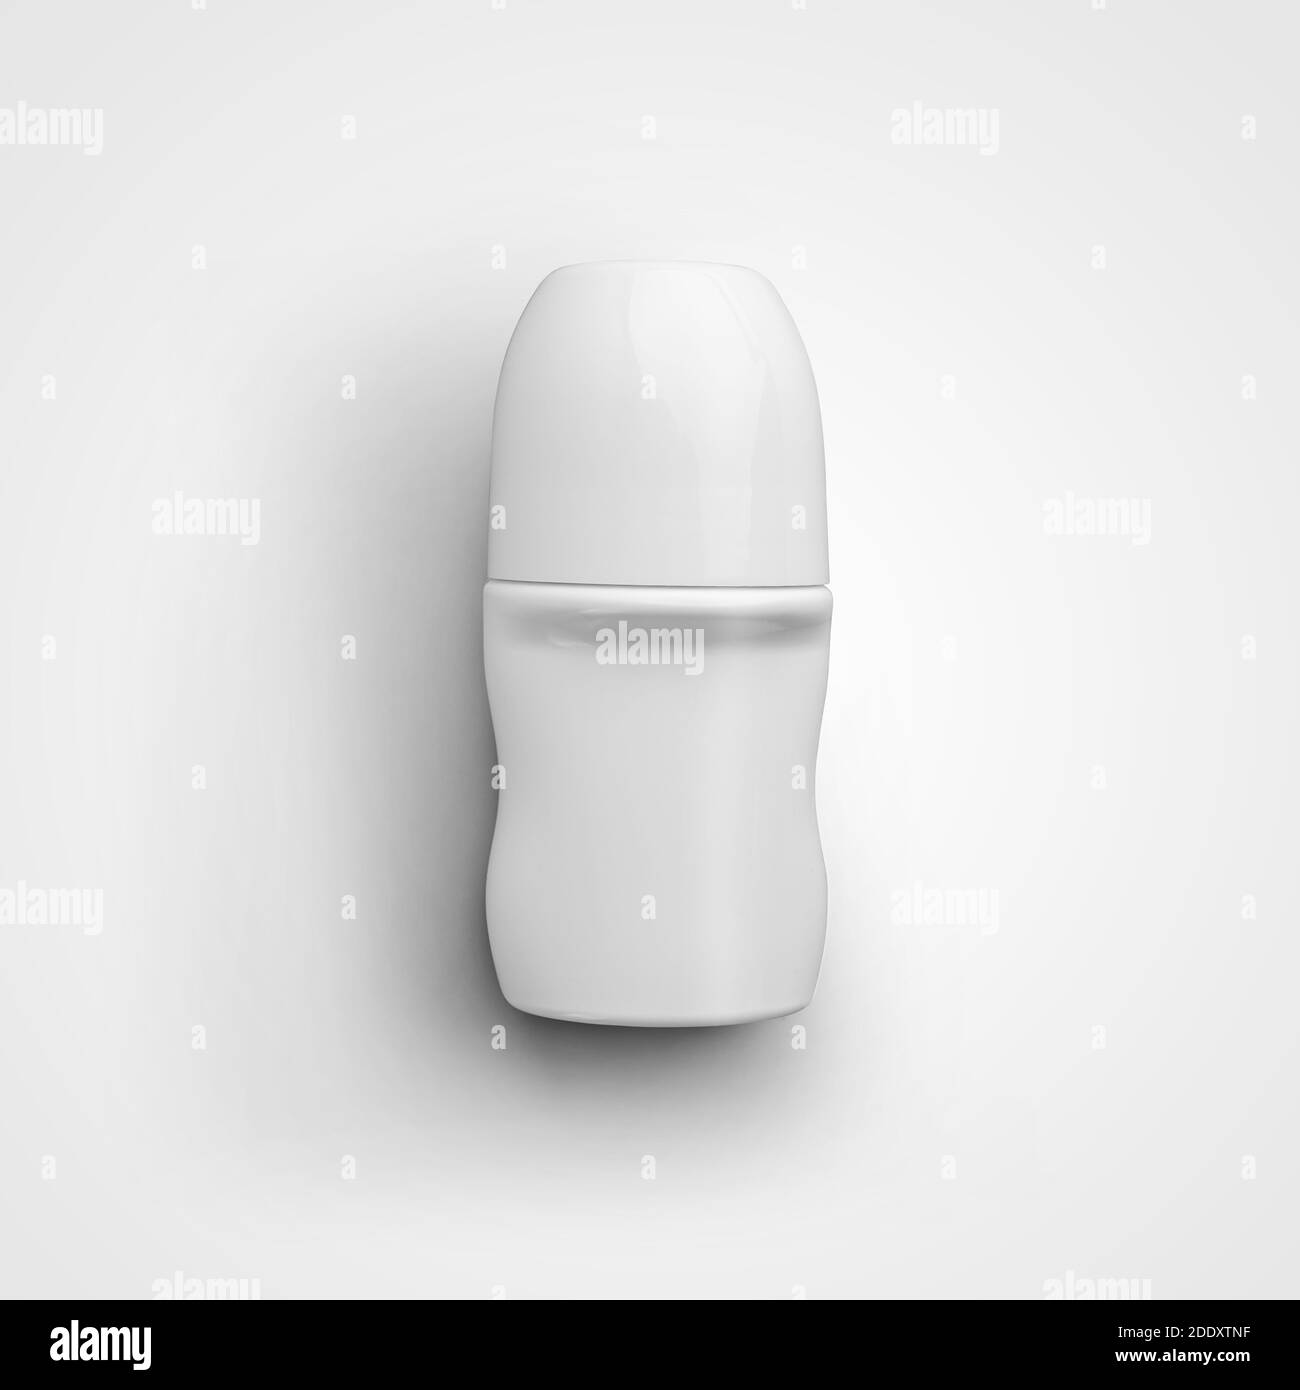 Download Template Of Plastic Glossy Jar Of Roll On Deodorant Antiperspirant White Stick Mockup With Cap Without Label Isolated On Background For Design Present Stock Photo Alamy